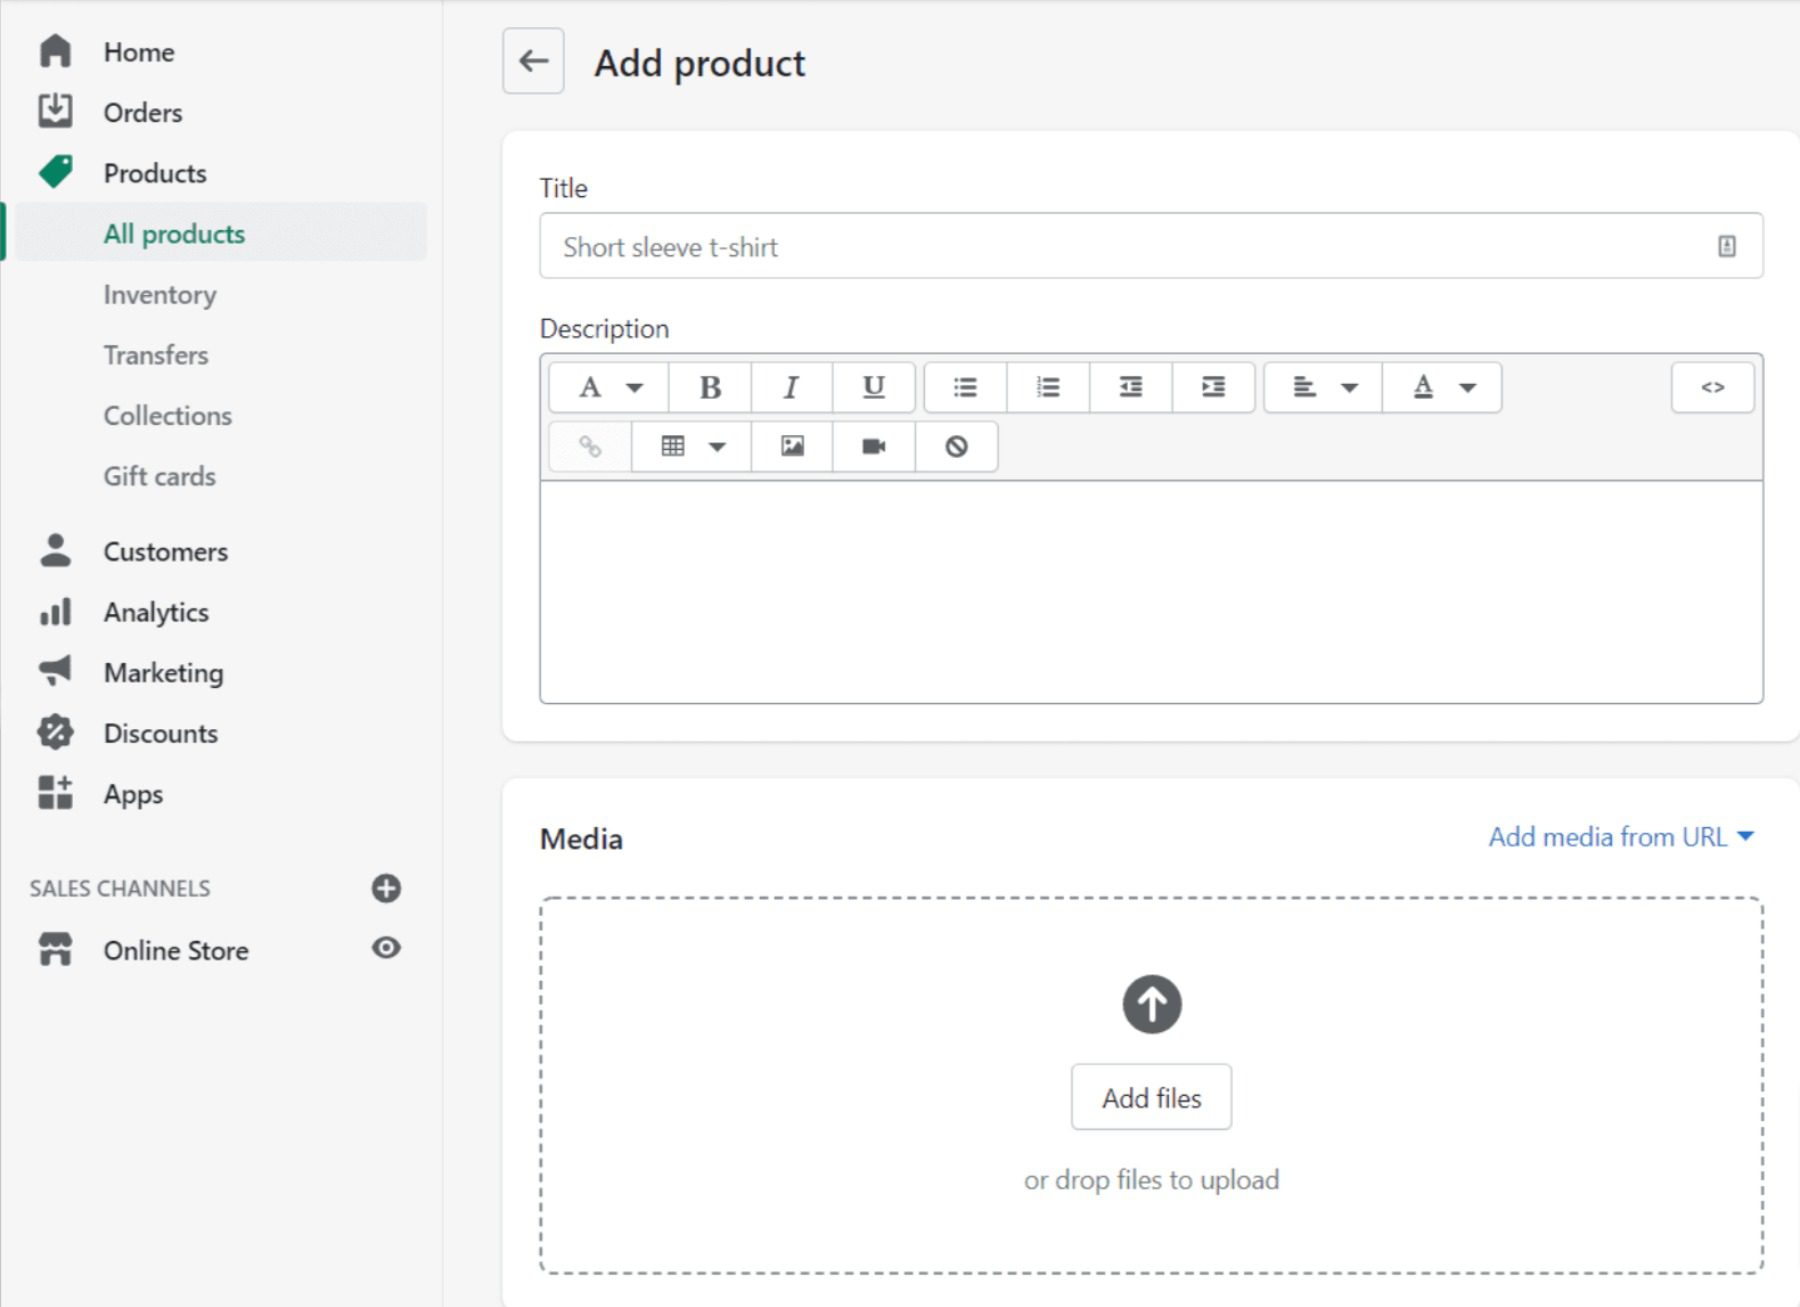 Adding a product in Shopify